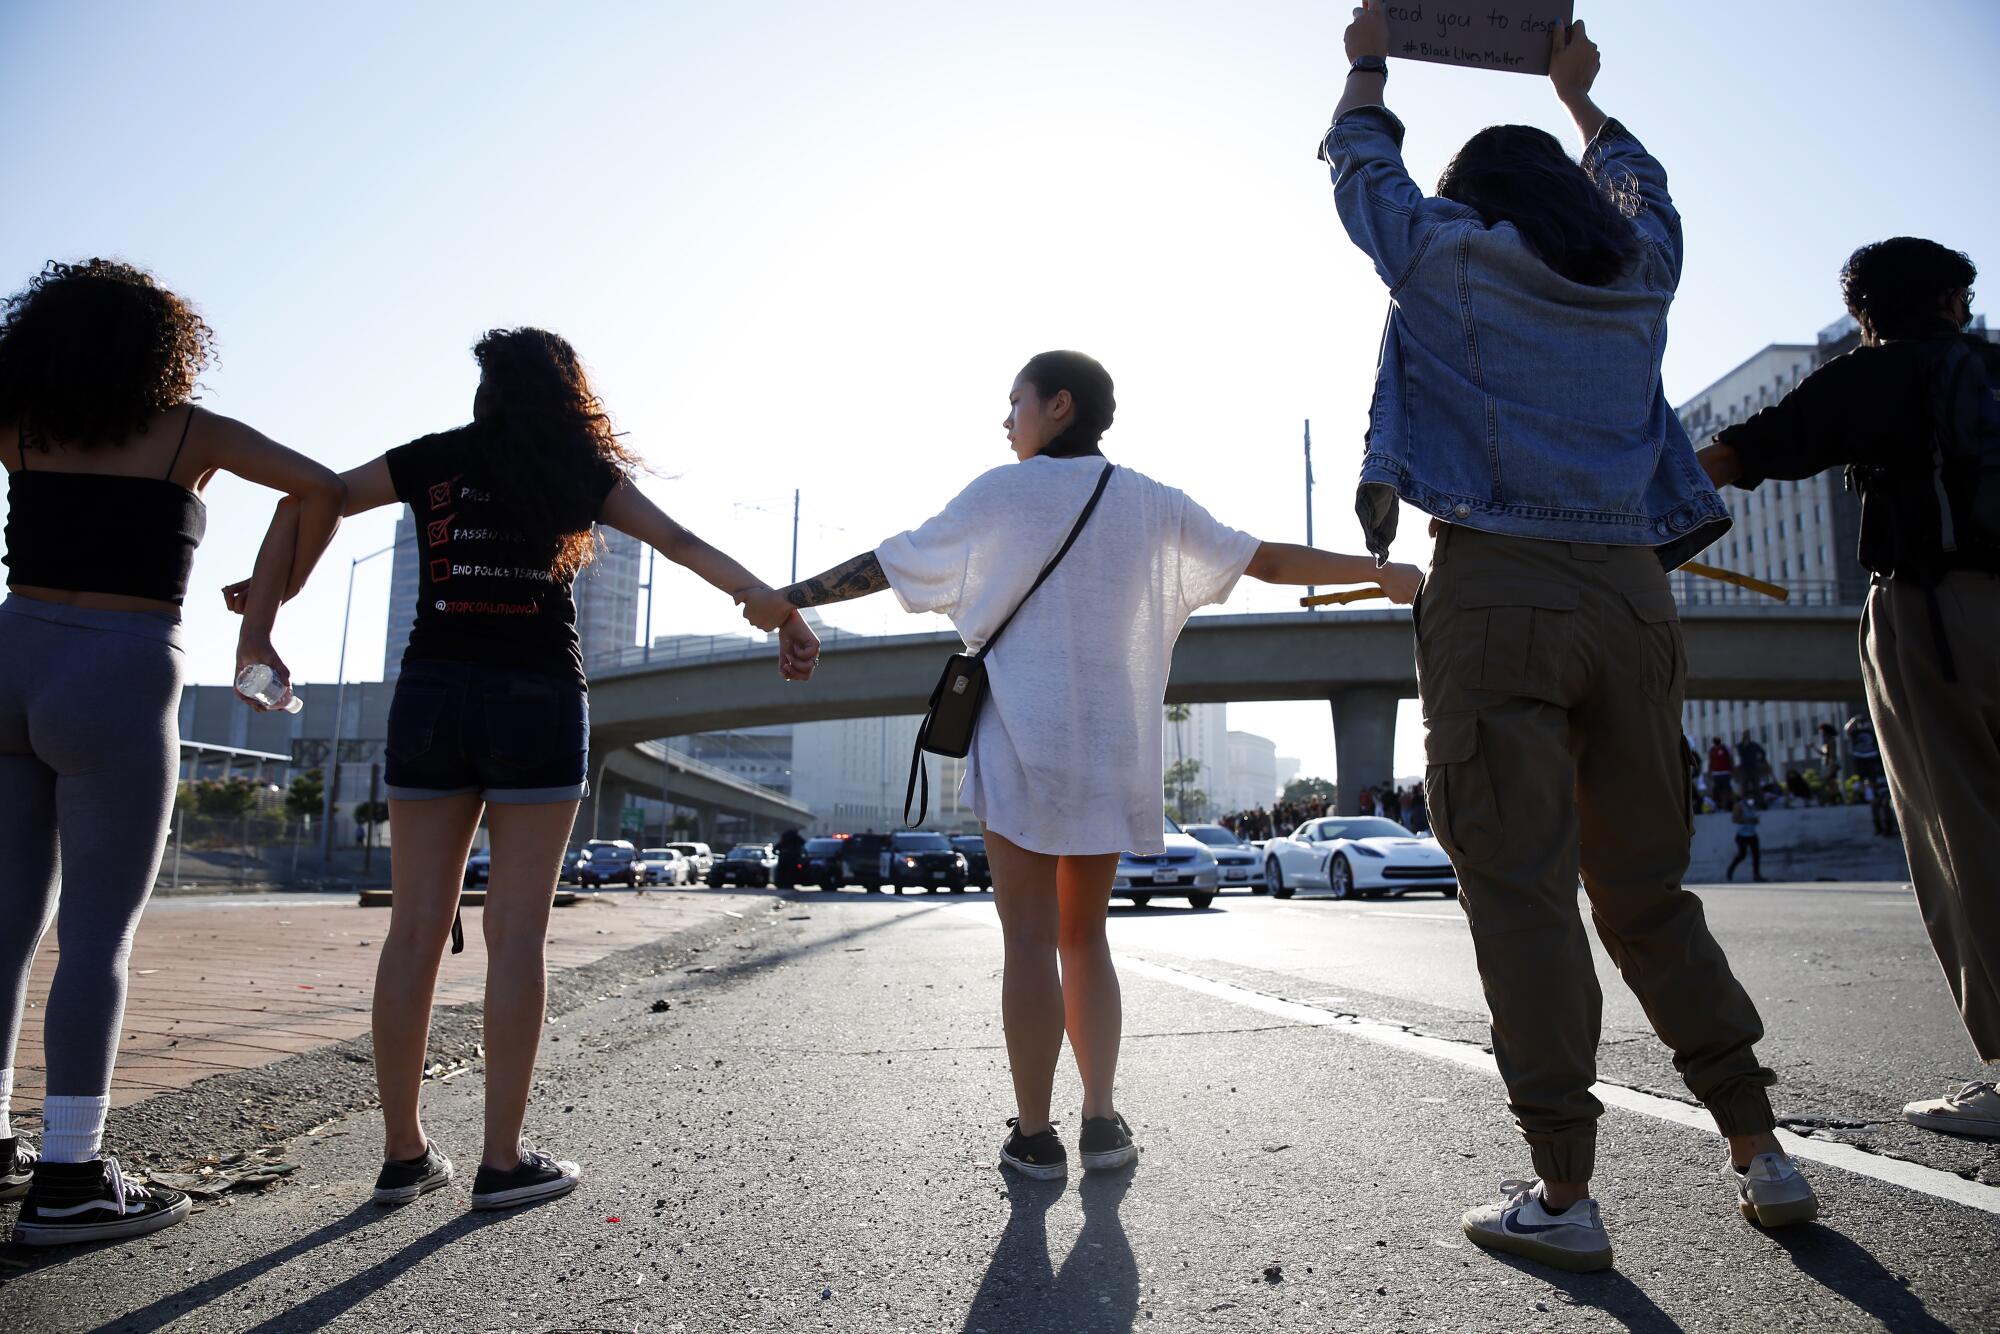 Protesters link hands across the 101 Freeway in downtown Los Angeles in a demonstration over the death of George Floyd in Minneapolis.